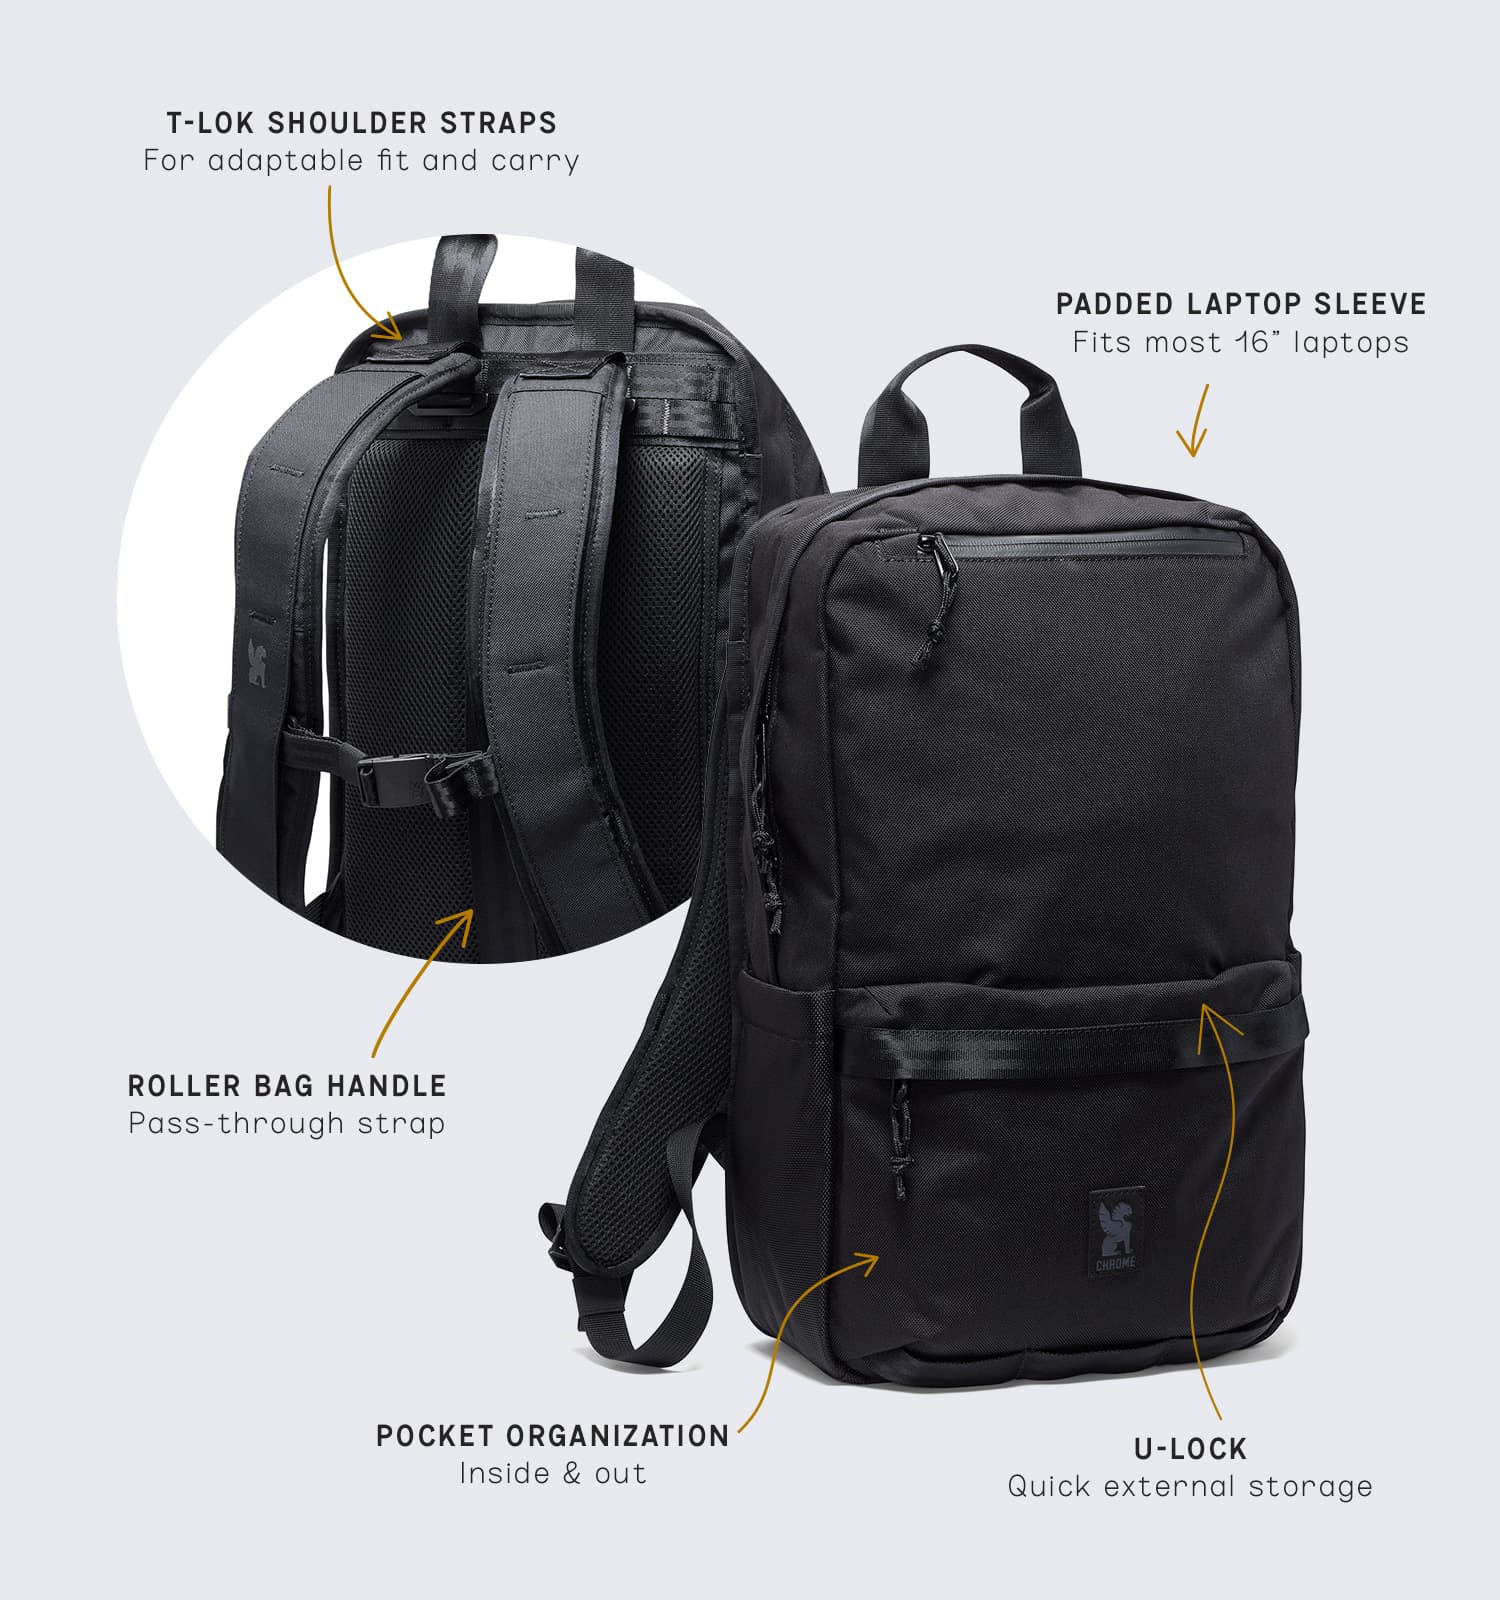 Hondo 18L Backpack in black feature callouts